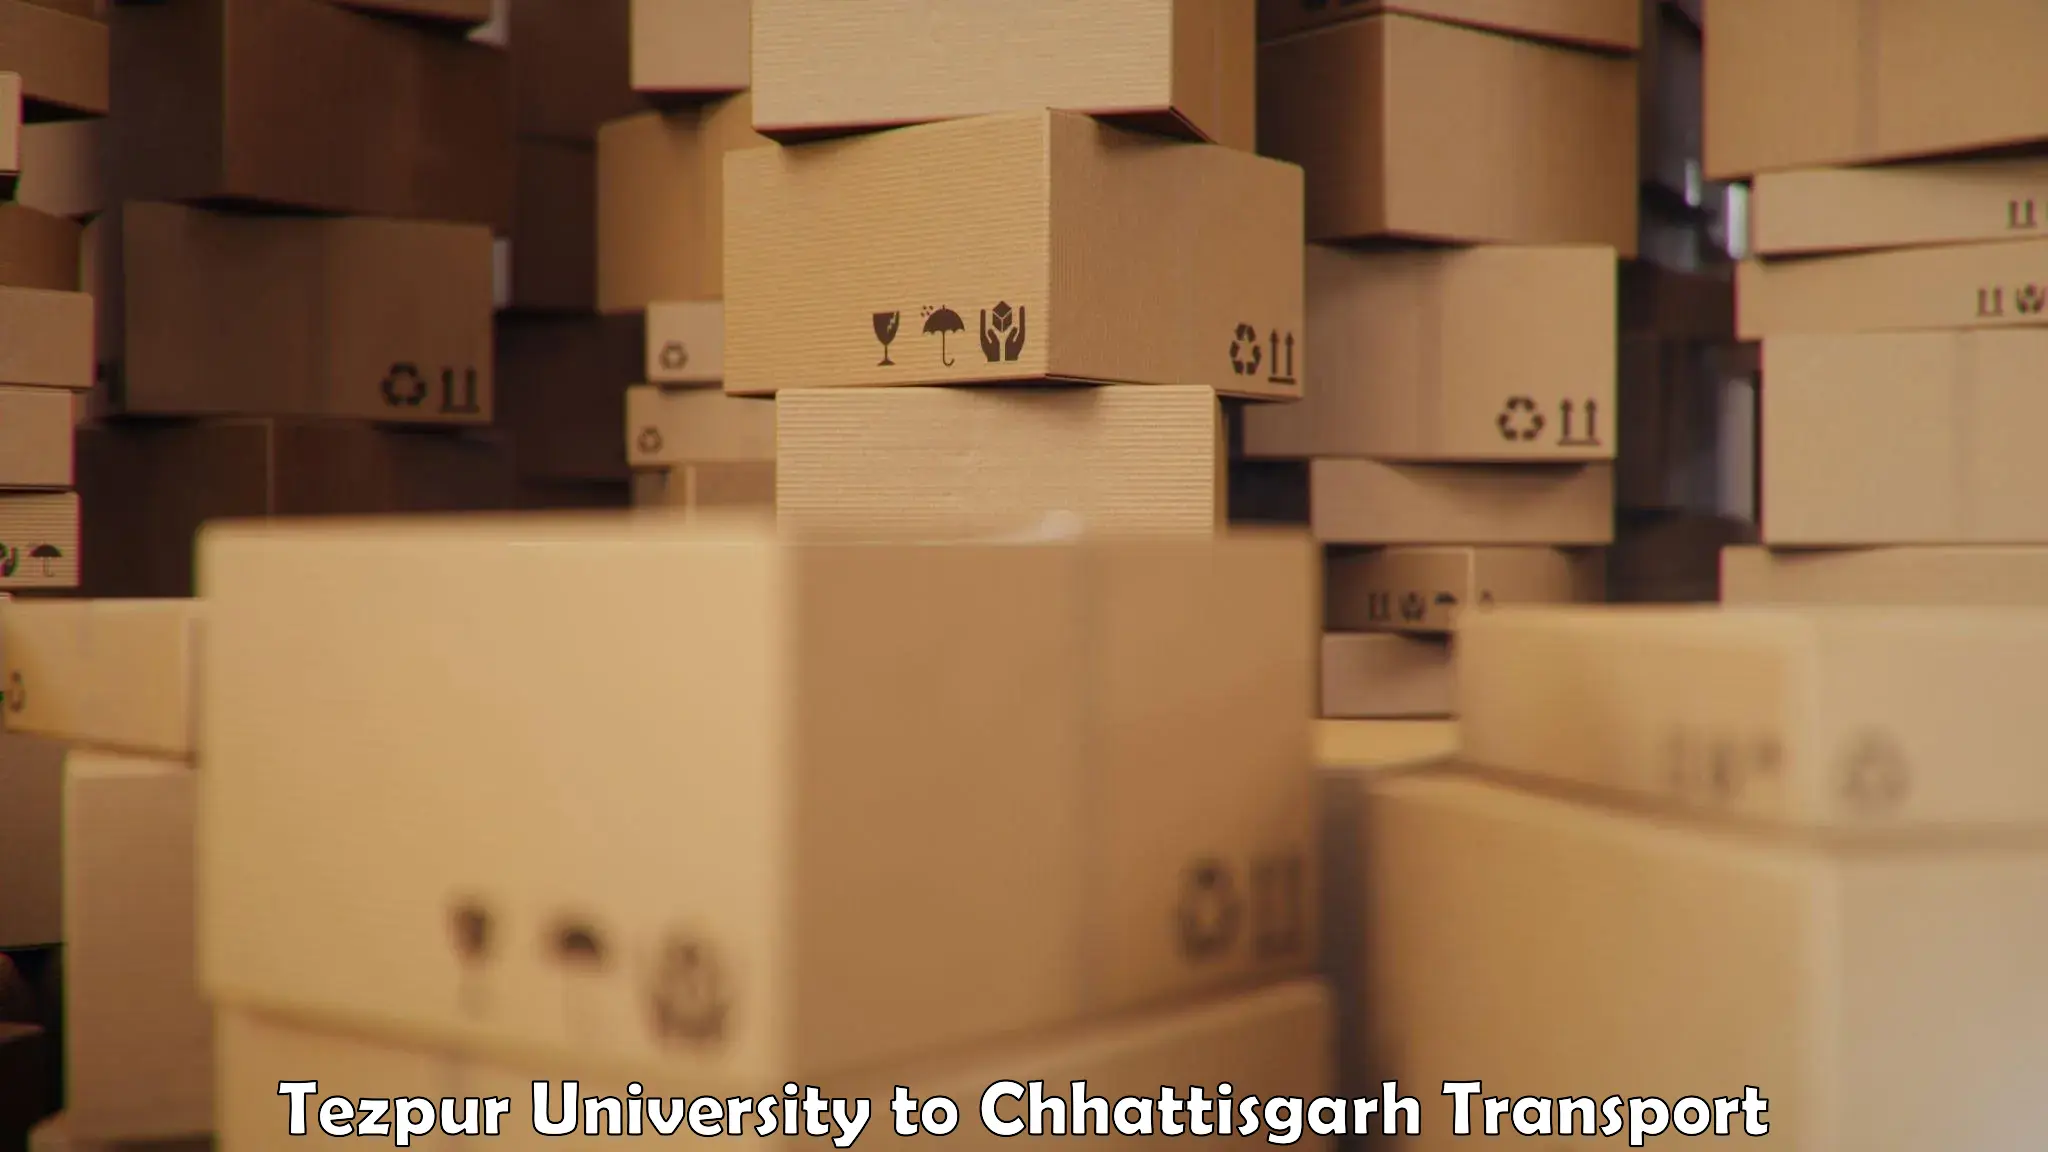 Truck transport companies in India Tezpur University to Pathalgaon